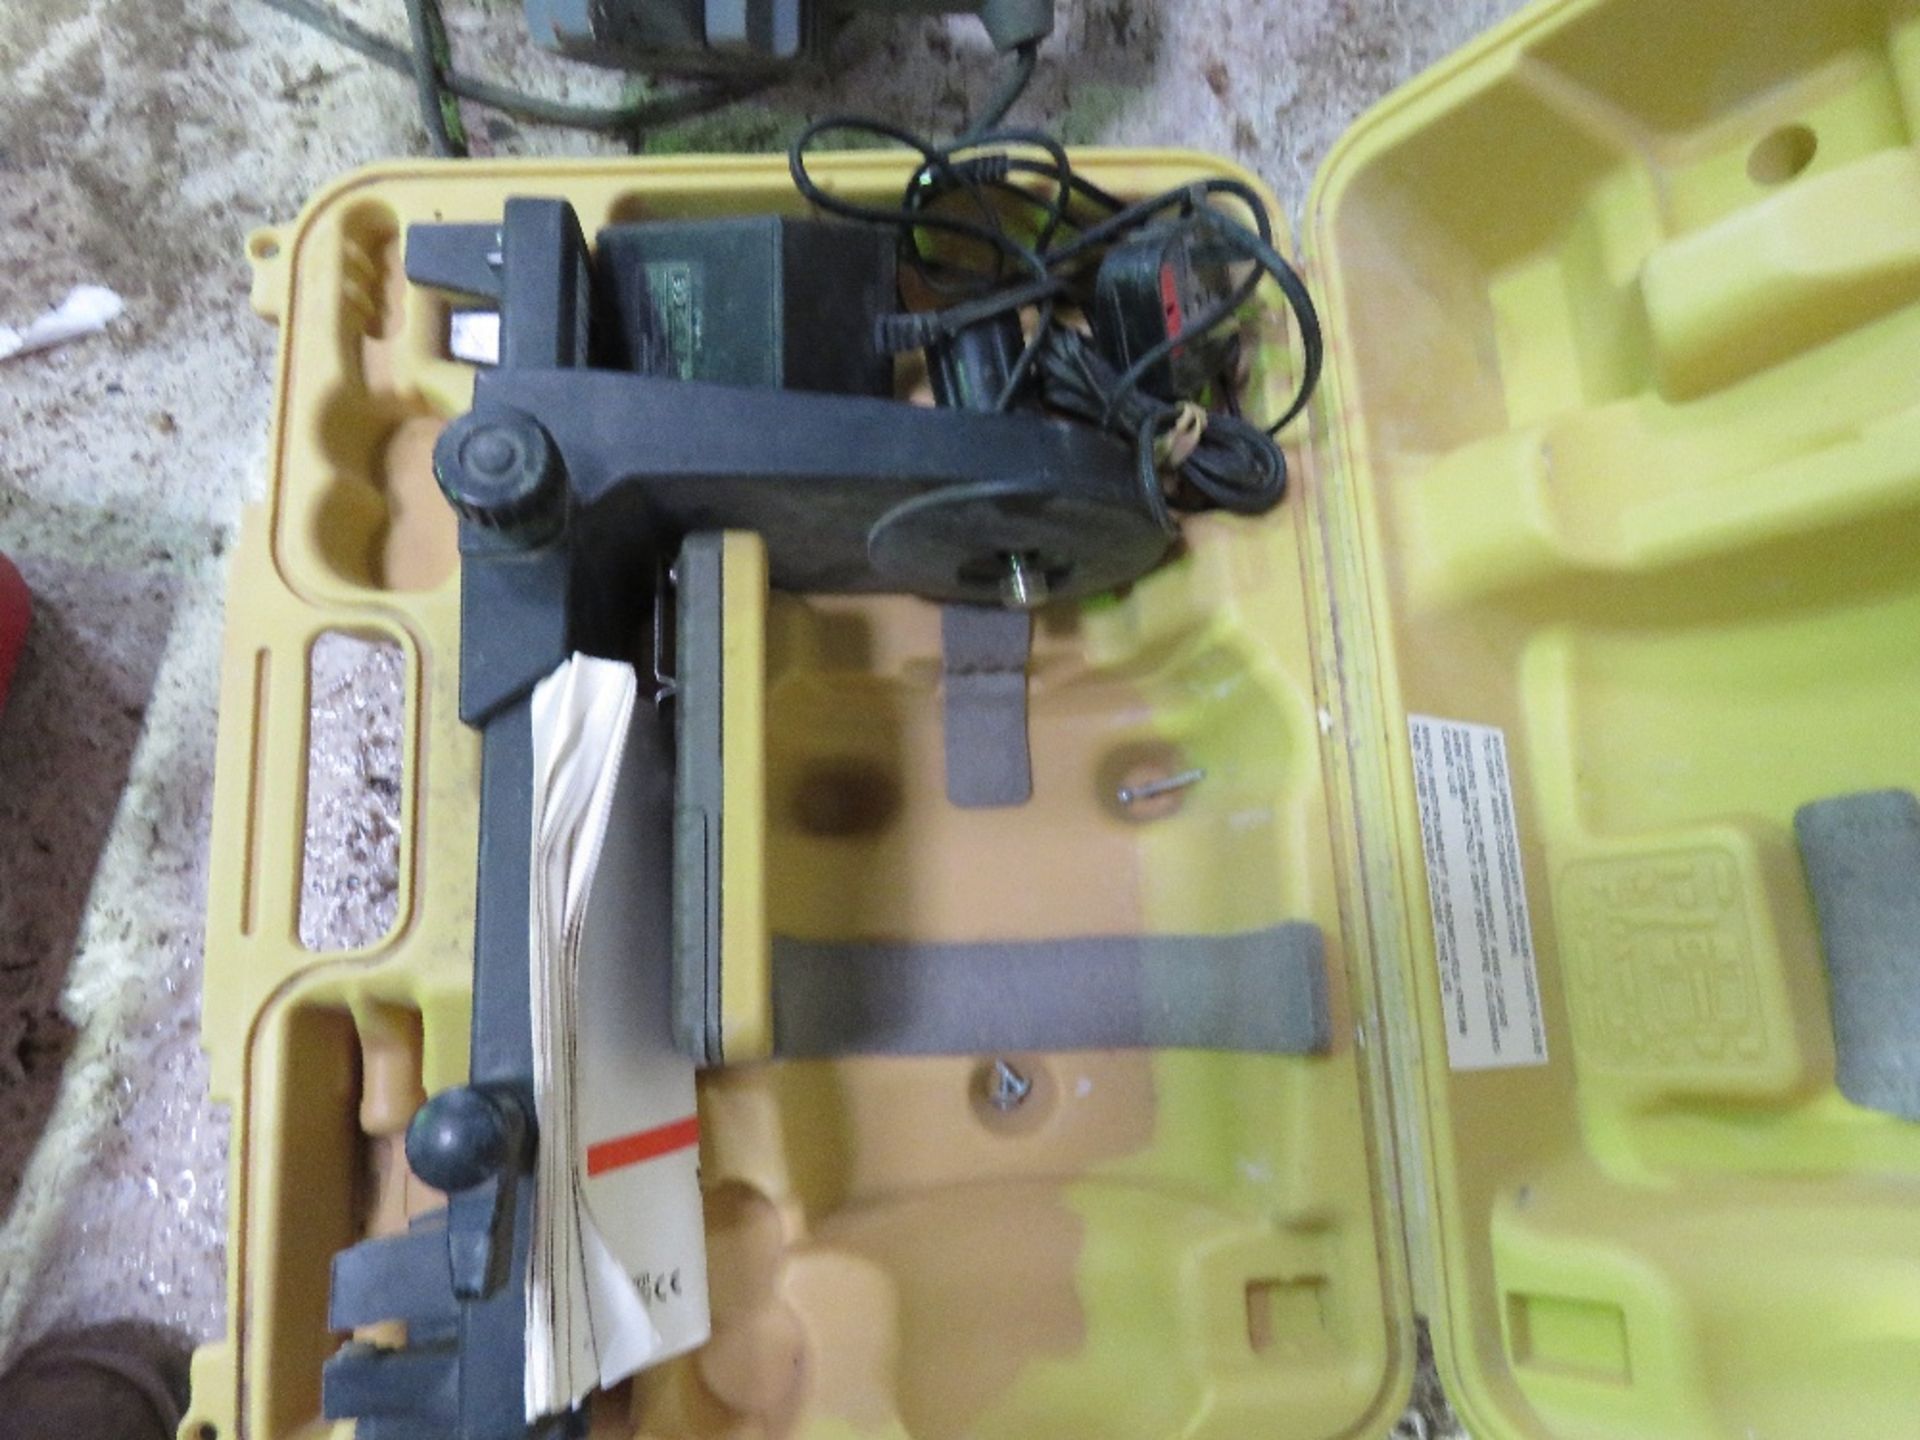 TOPCON RL-VH3D ROTATING LASER LEVEL SET IN A CASE. DIRECT FROM LOCAL COMPANY. - Image 2 of 5